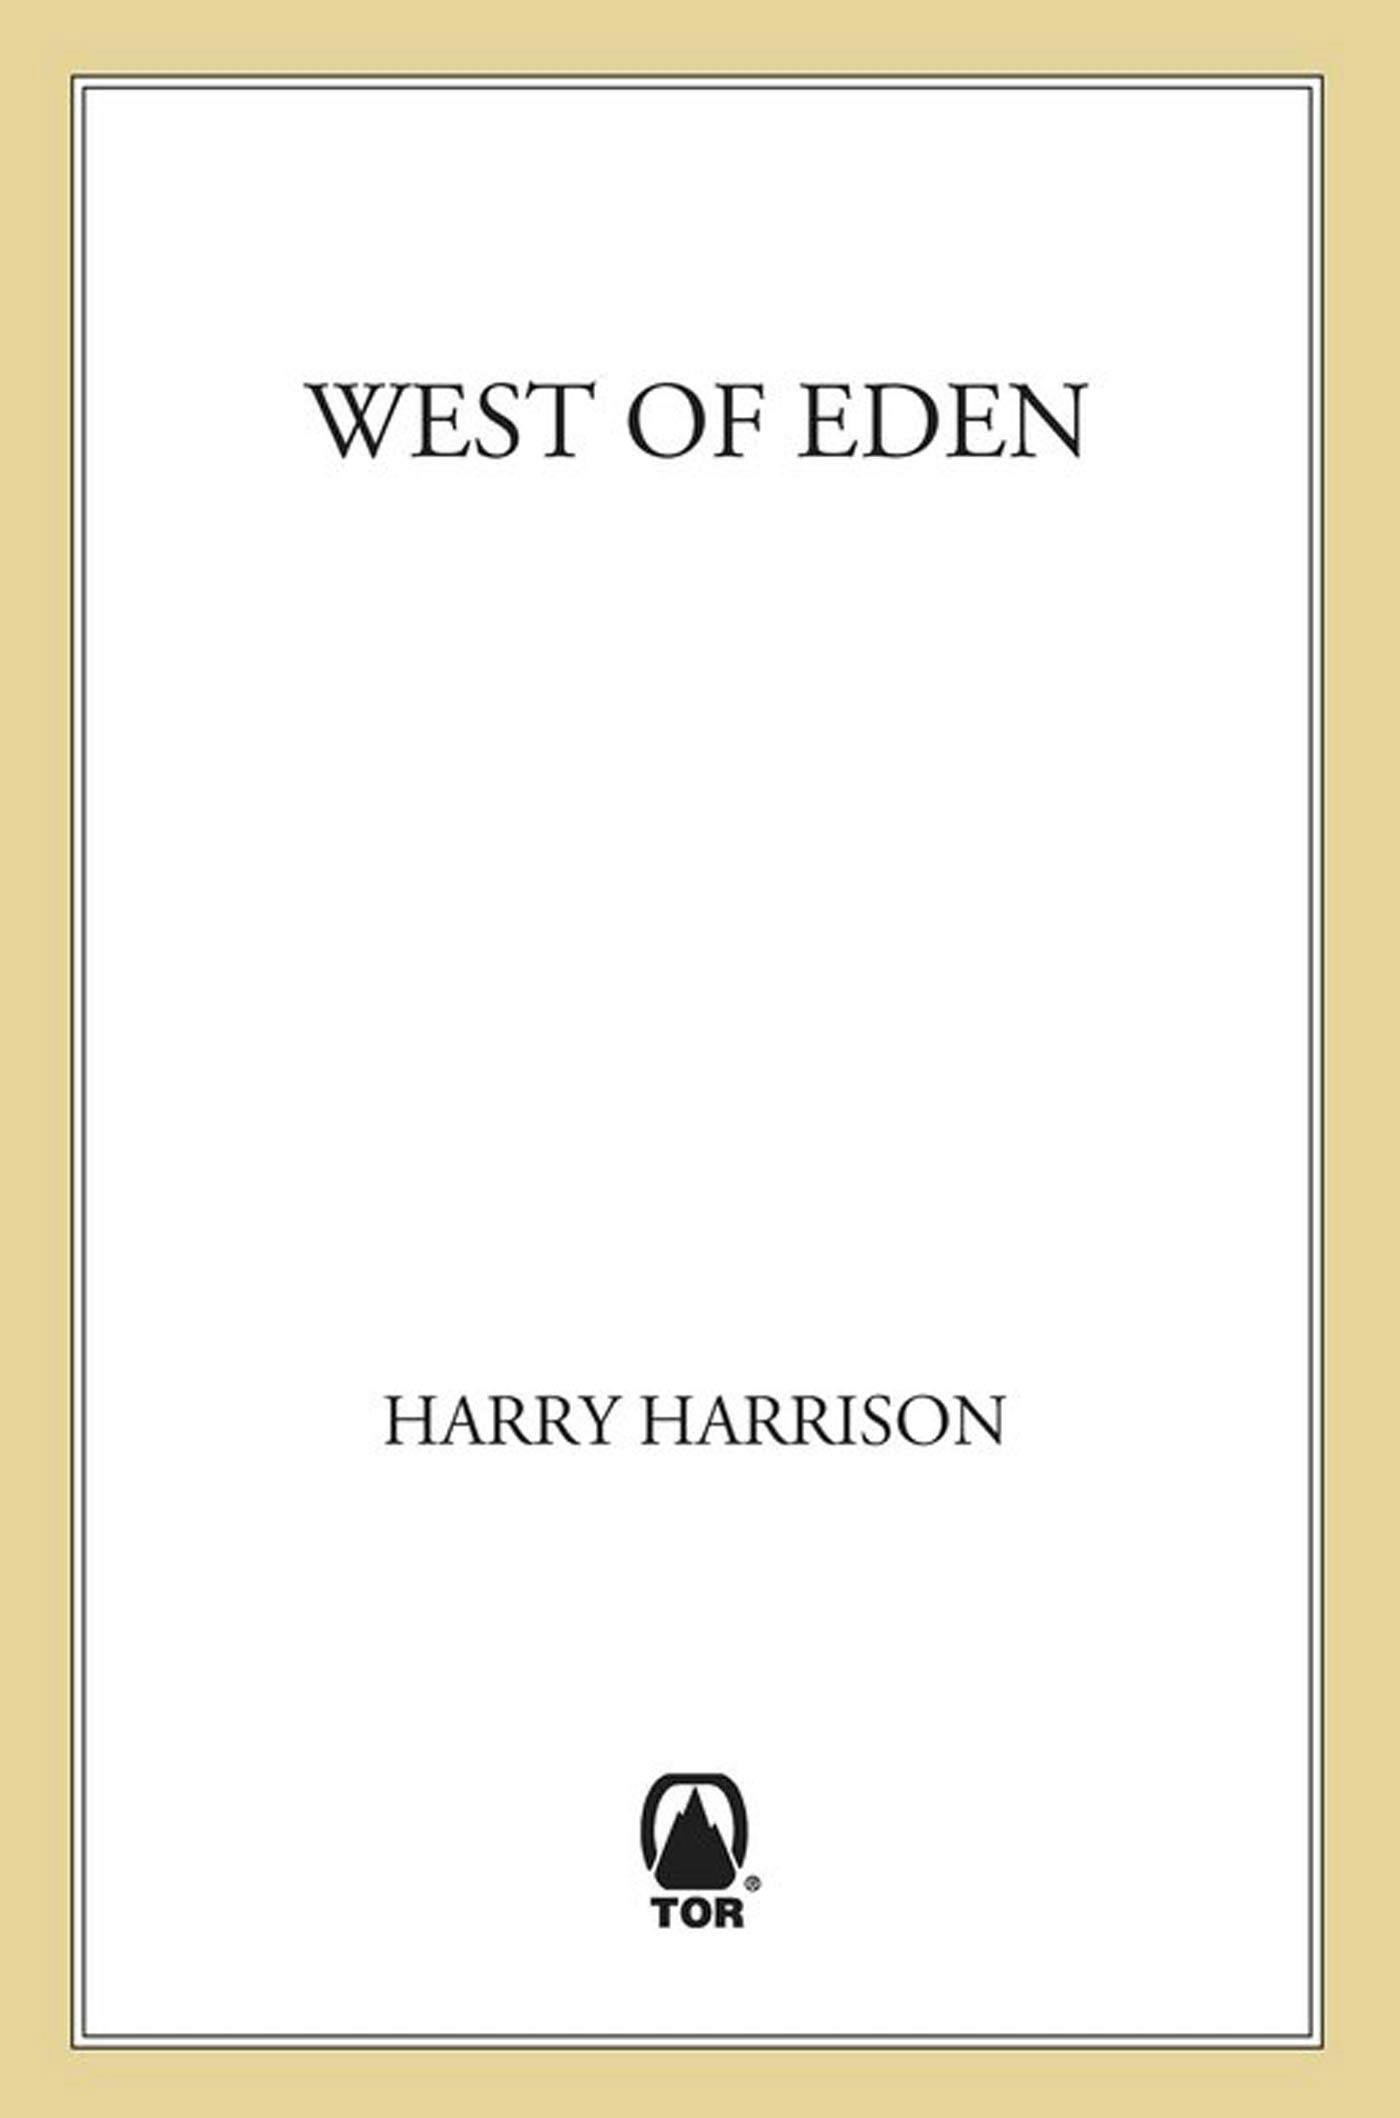 Cover for the book titled as: West of Eden